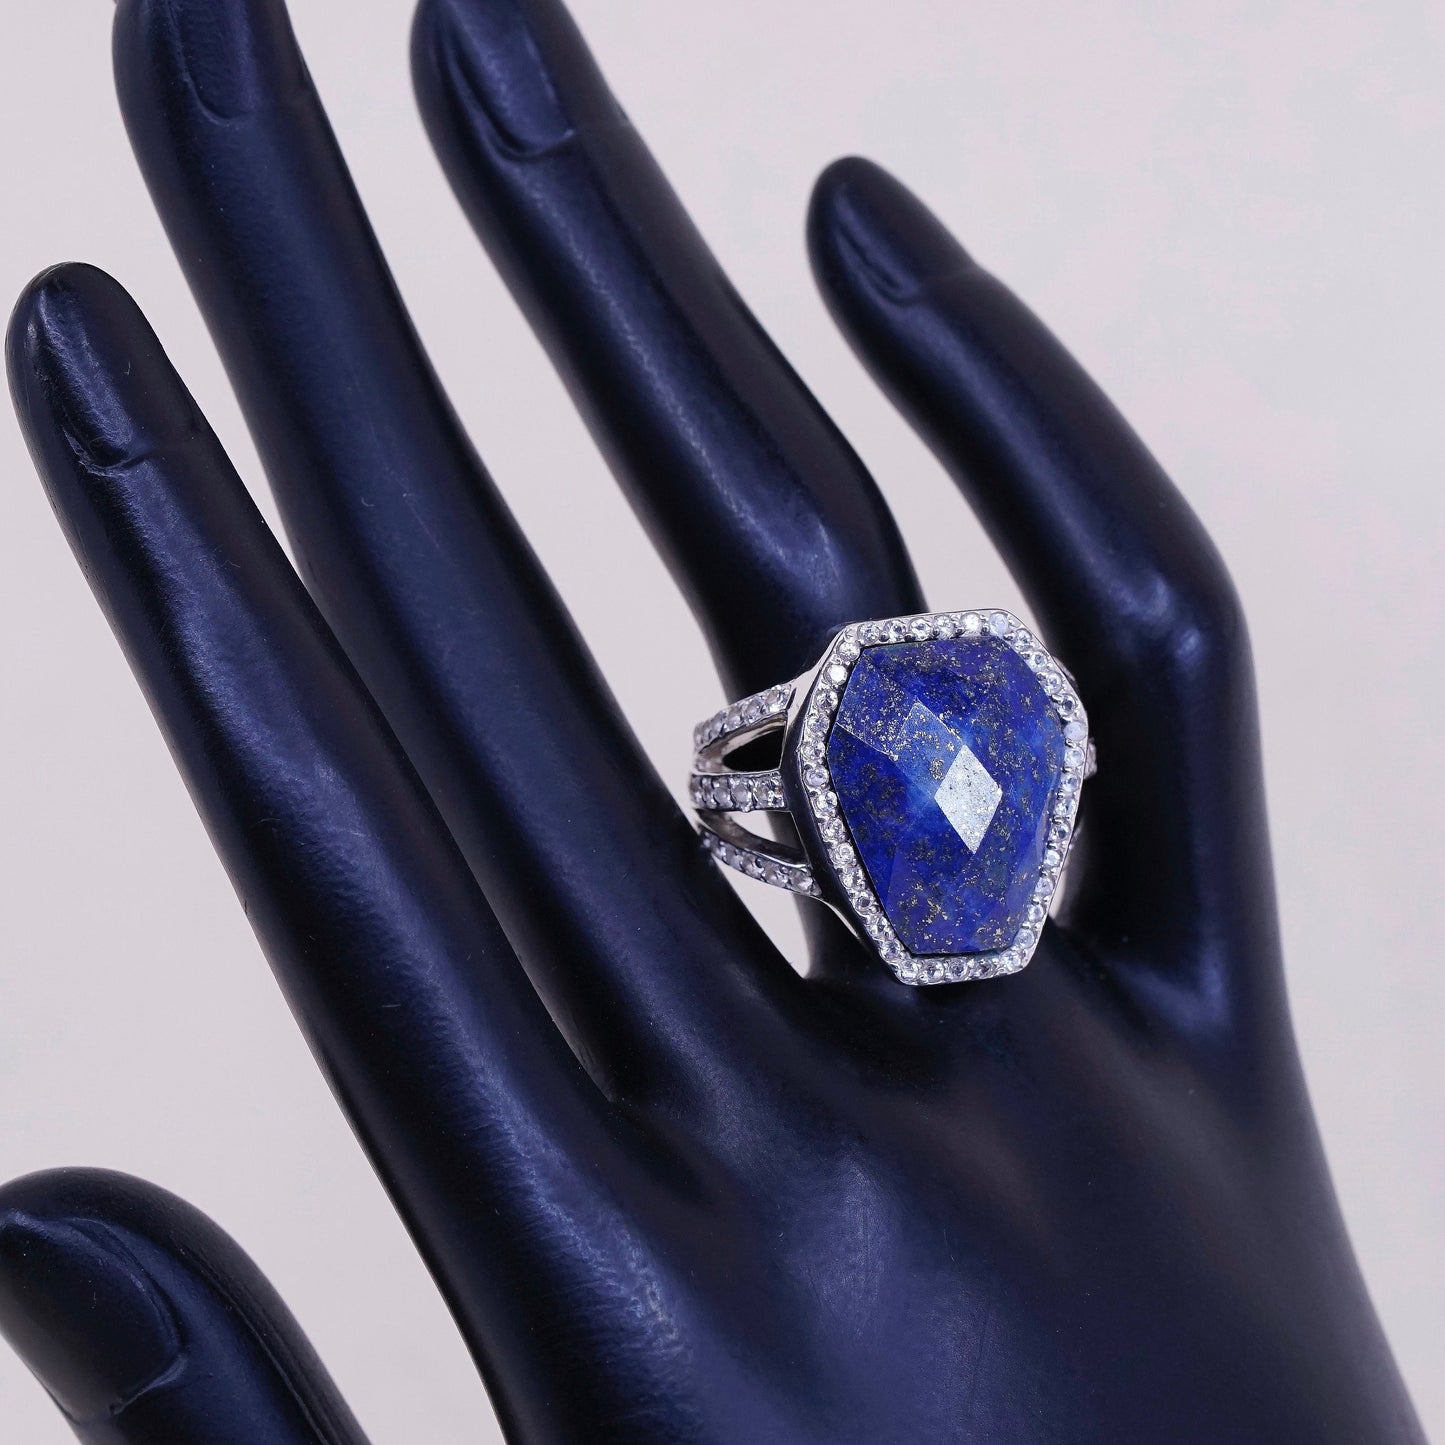 Size 10, vtg sterling 925 silver handmade ring with Lapis lazuli and Cz around